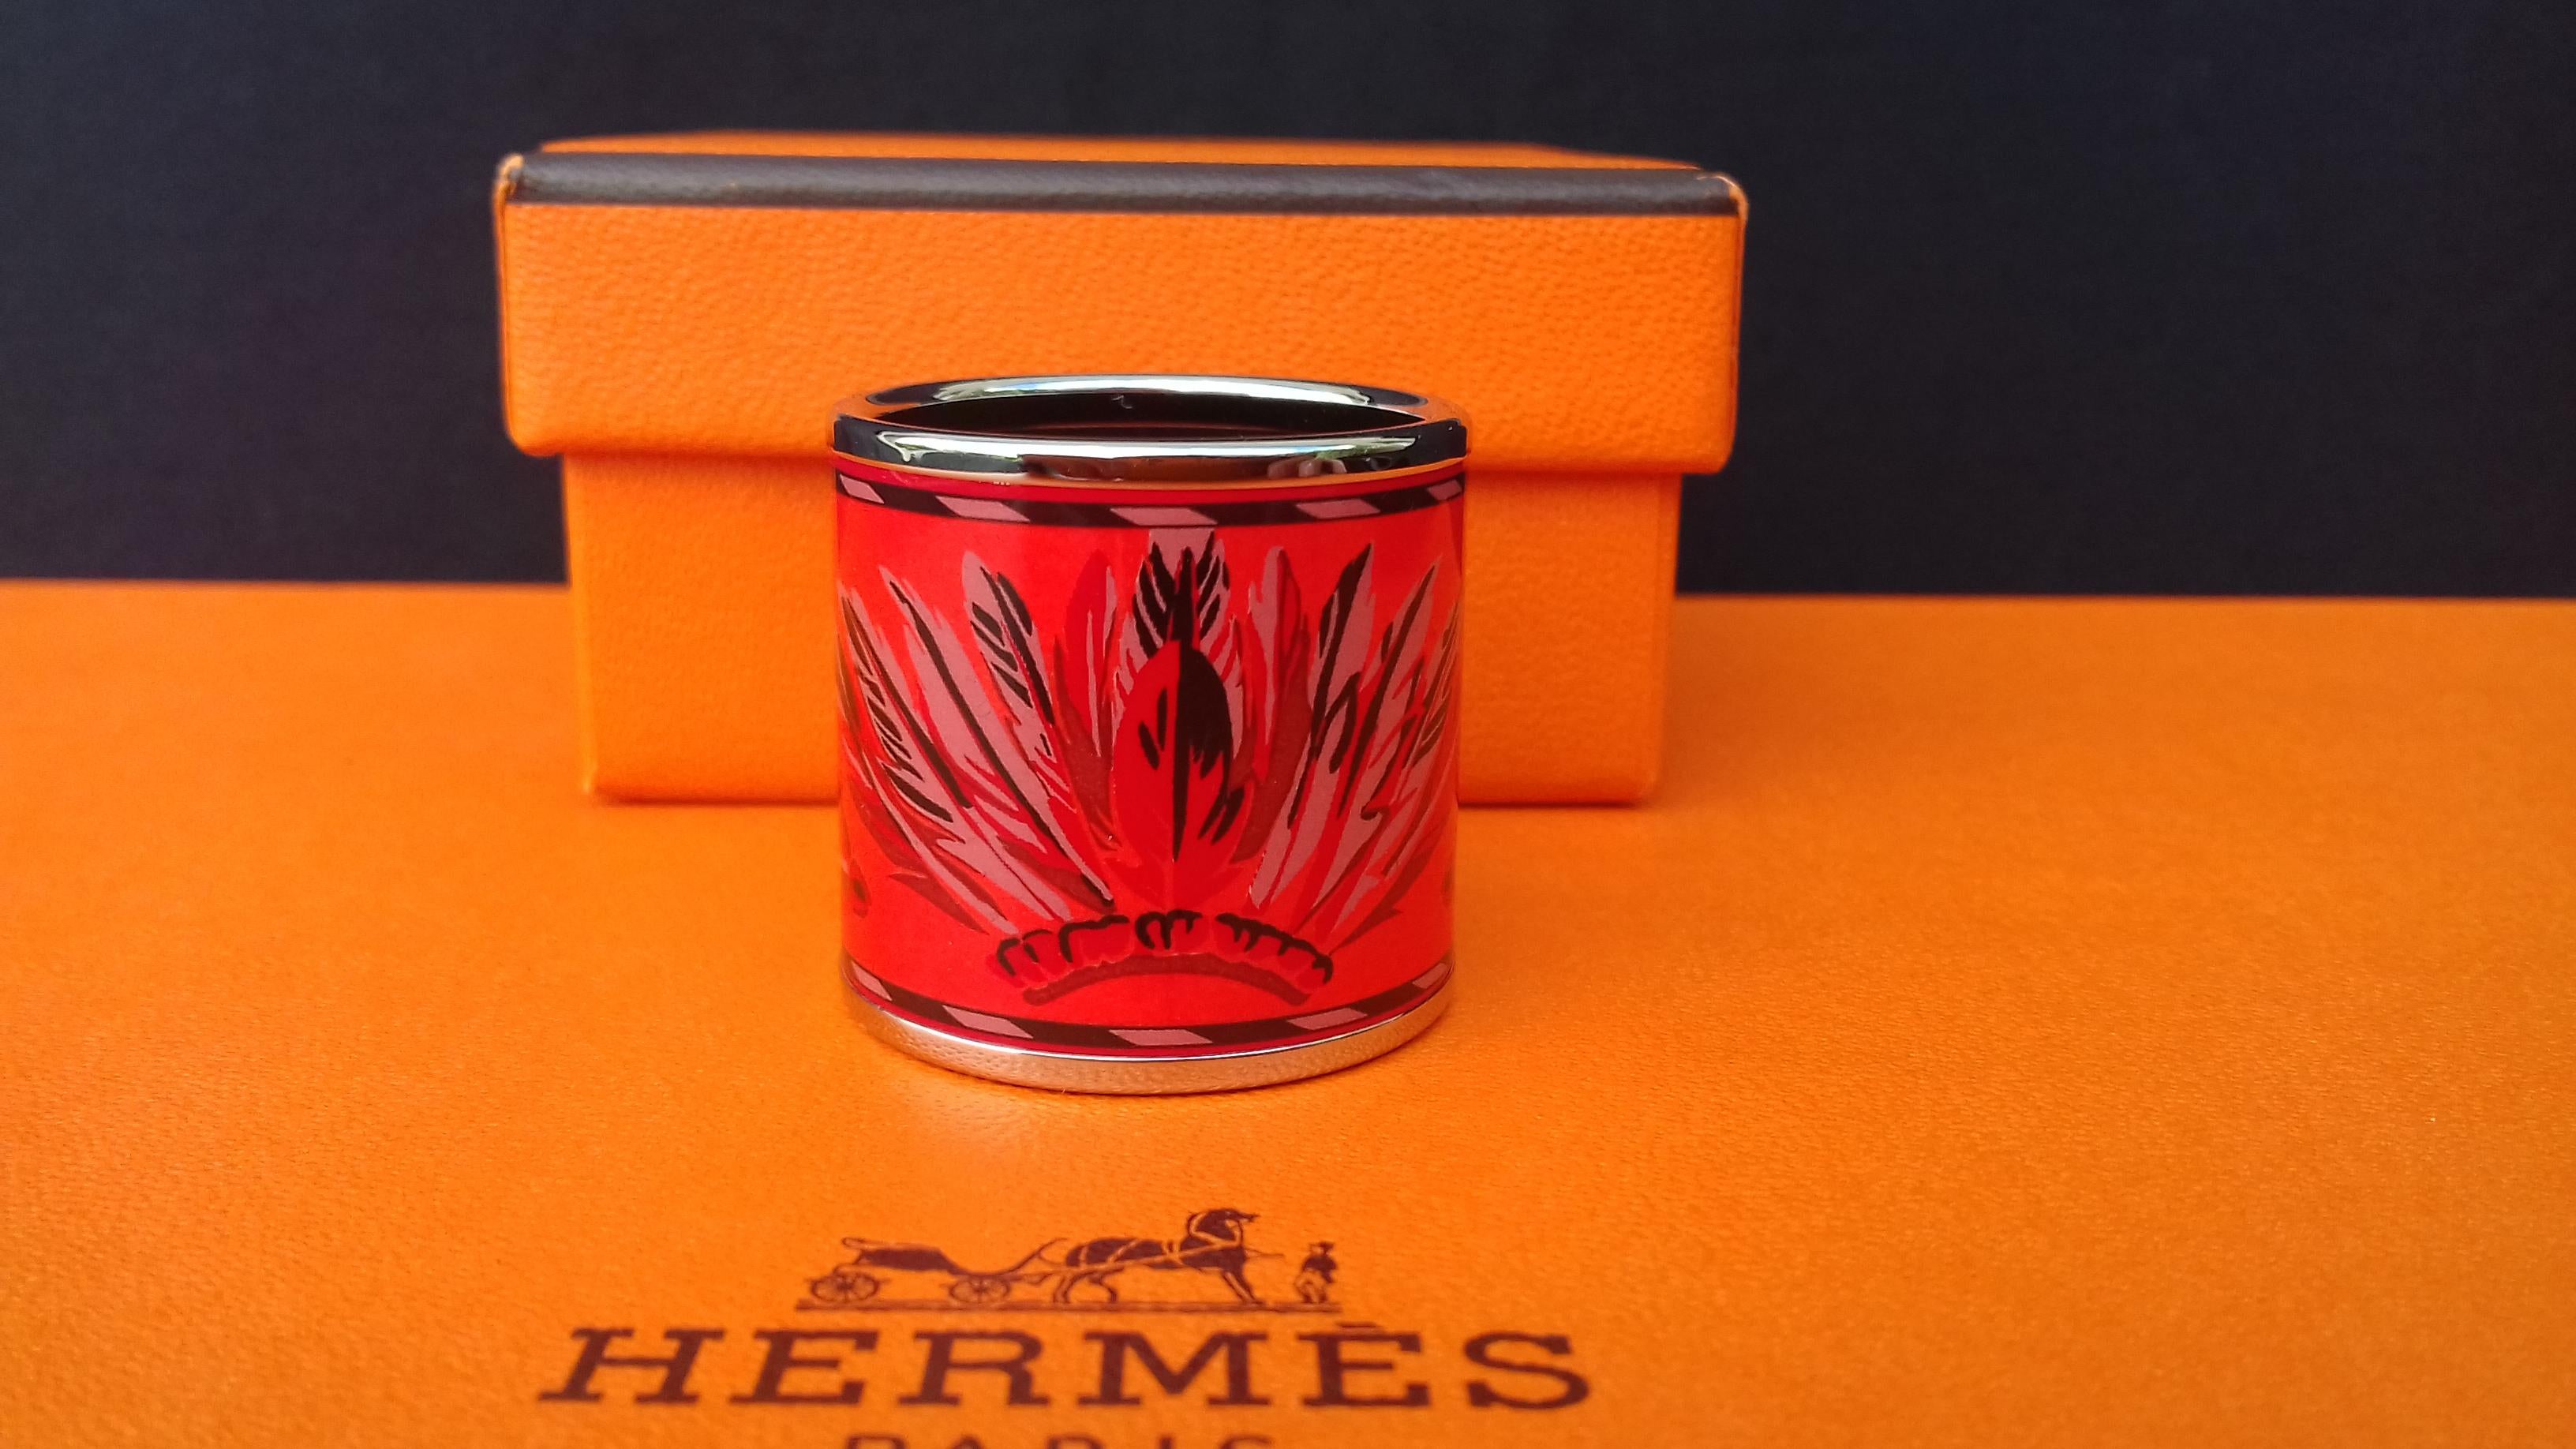 Beautiful Authentic Hermès Scarf Ring

Pattern: 